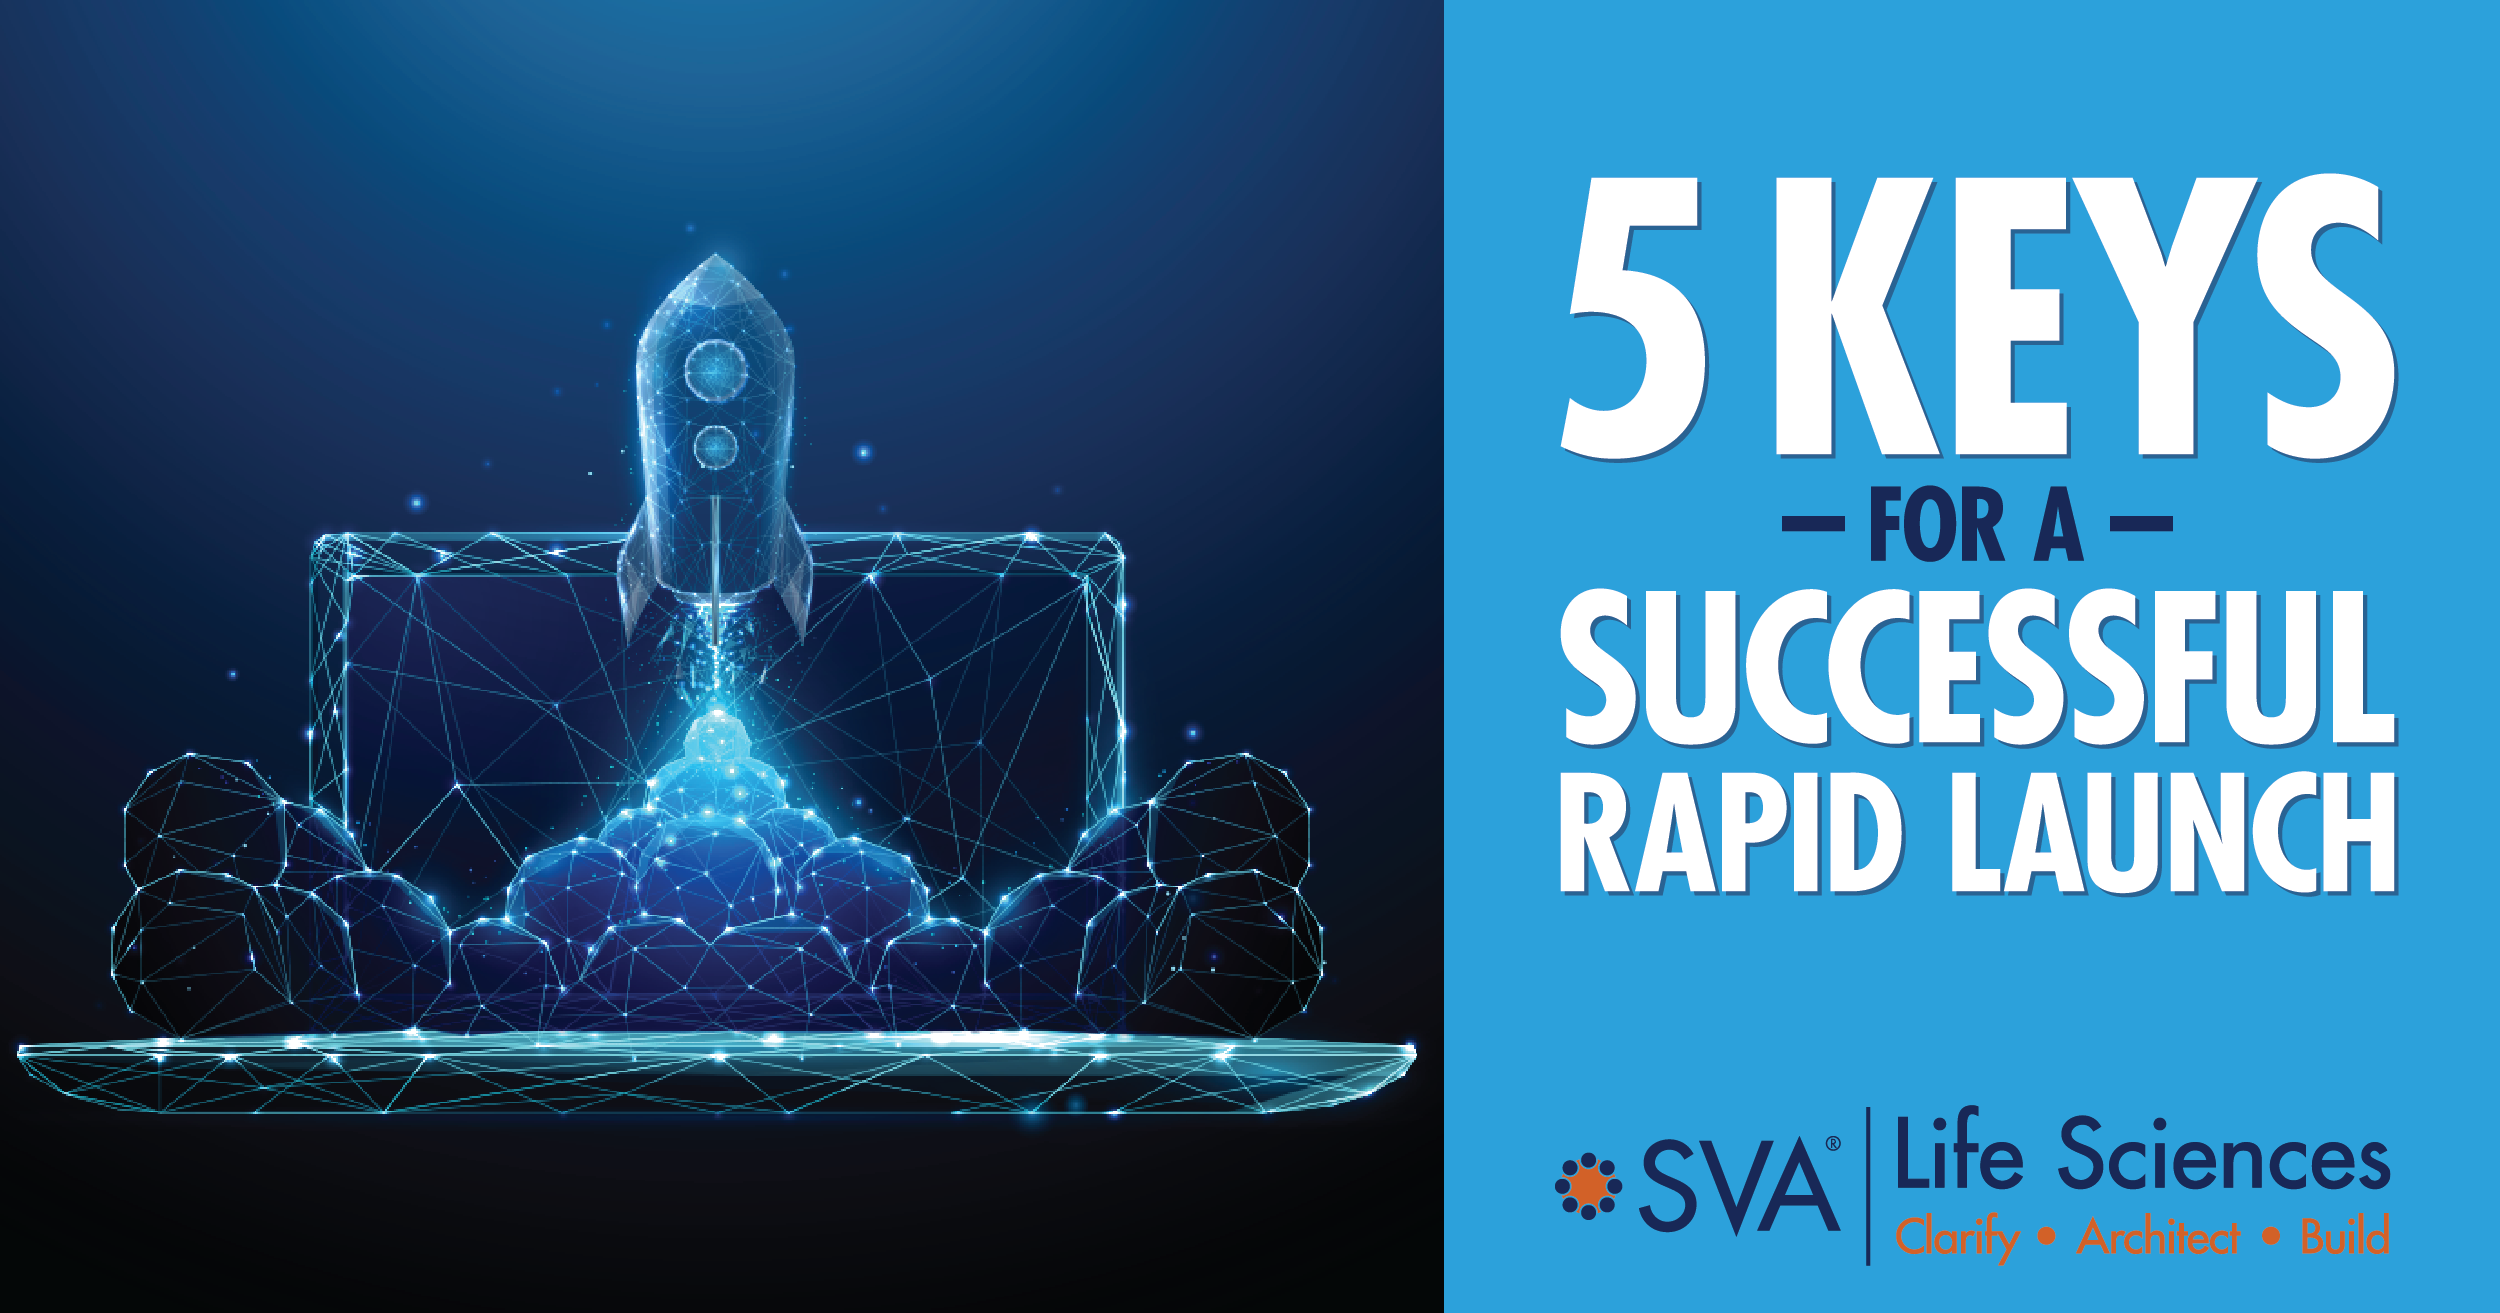 Five Keys for a Successful Rapid Launch | SVA